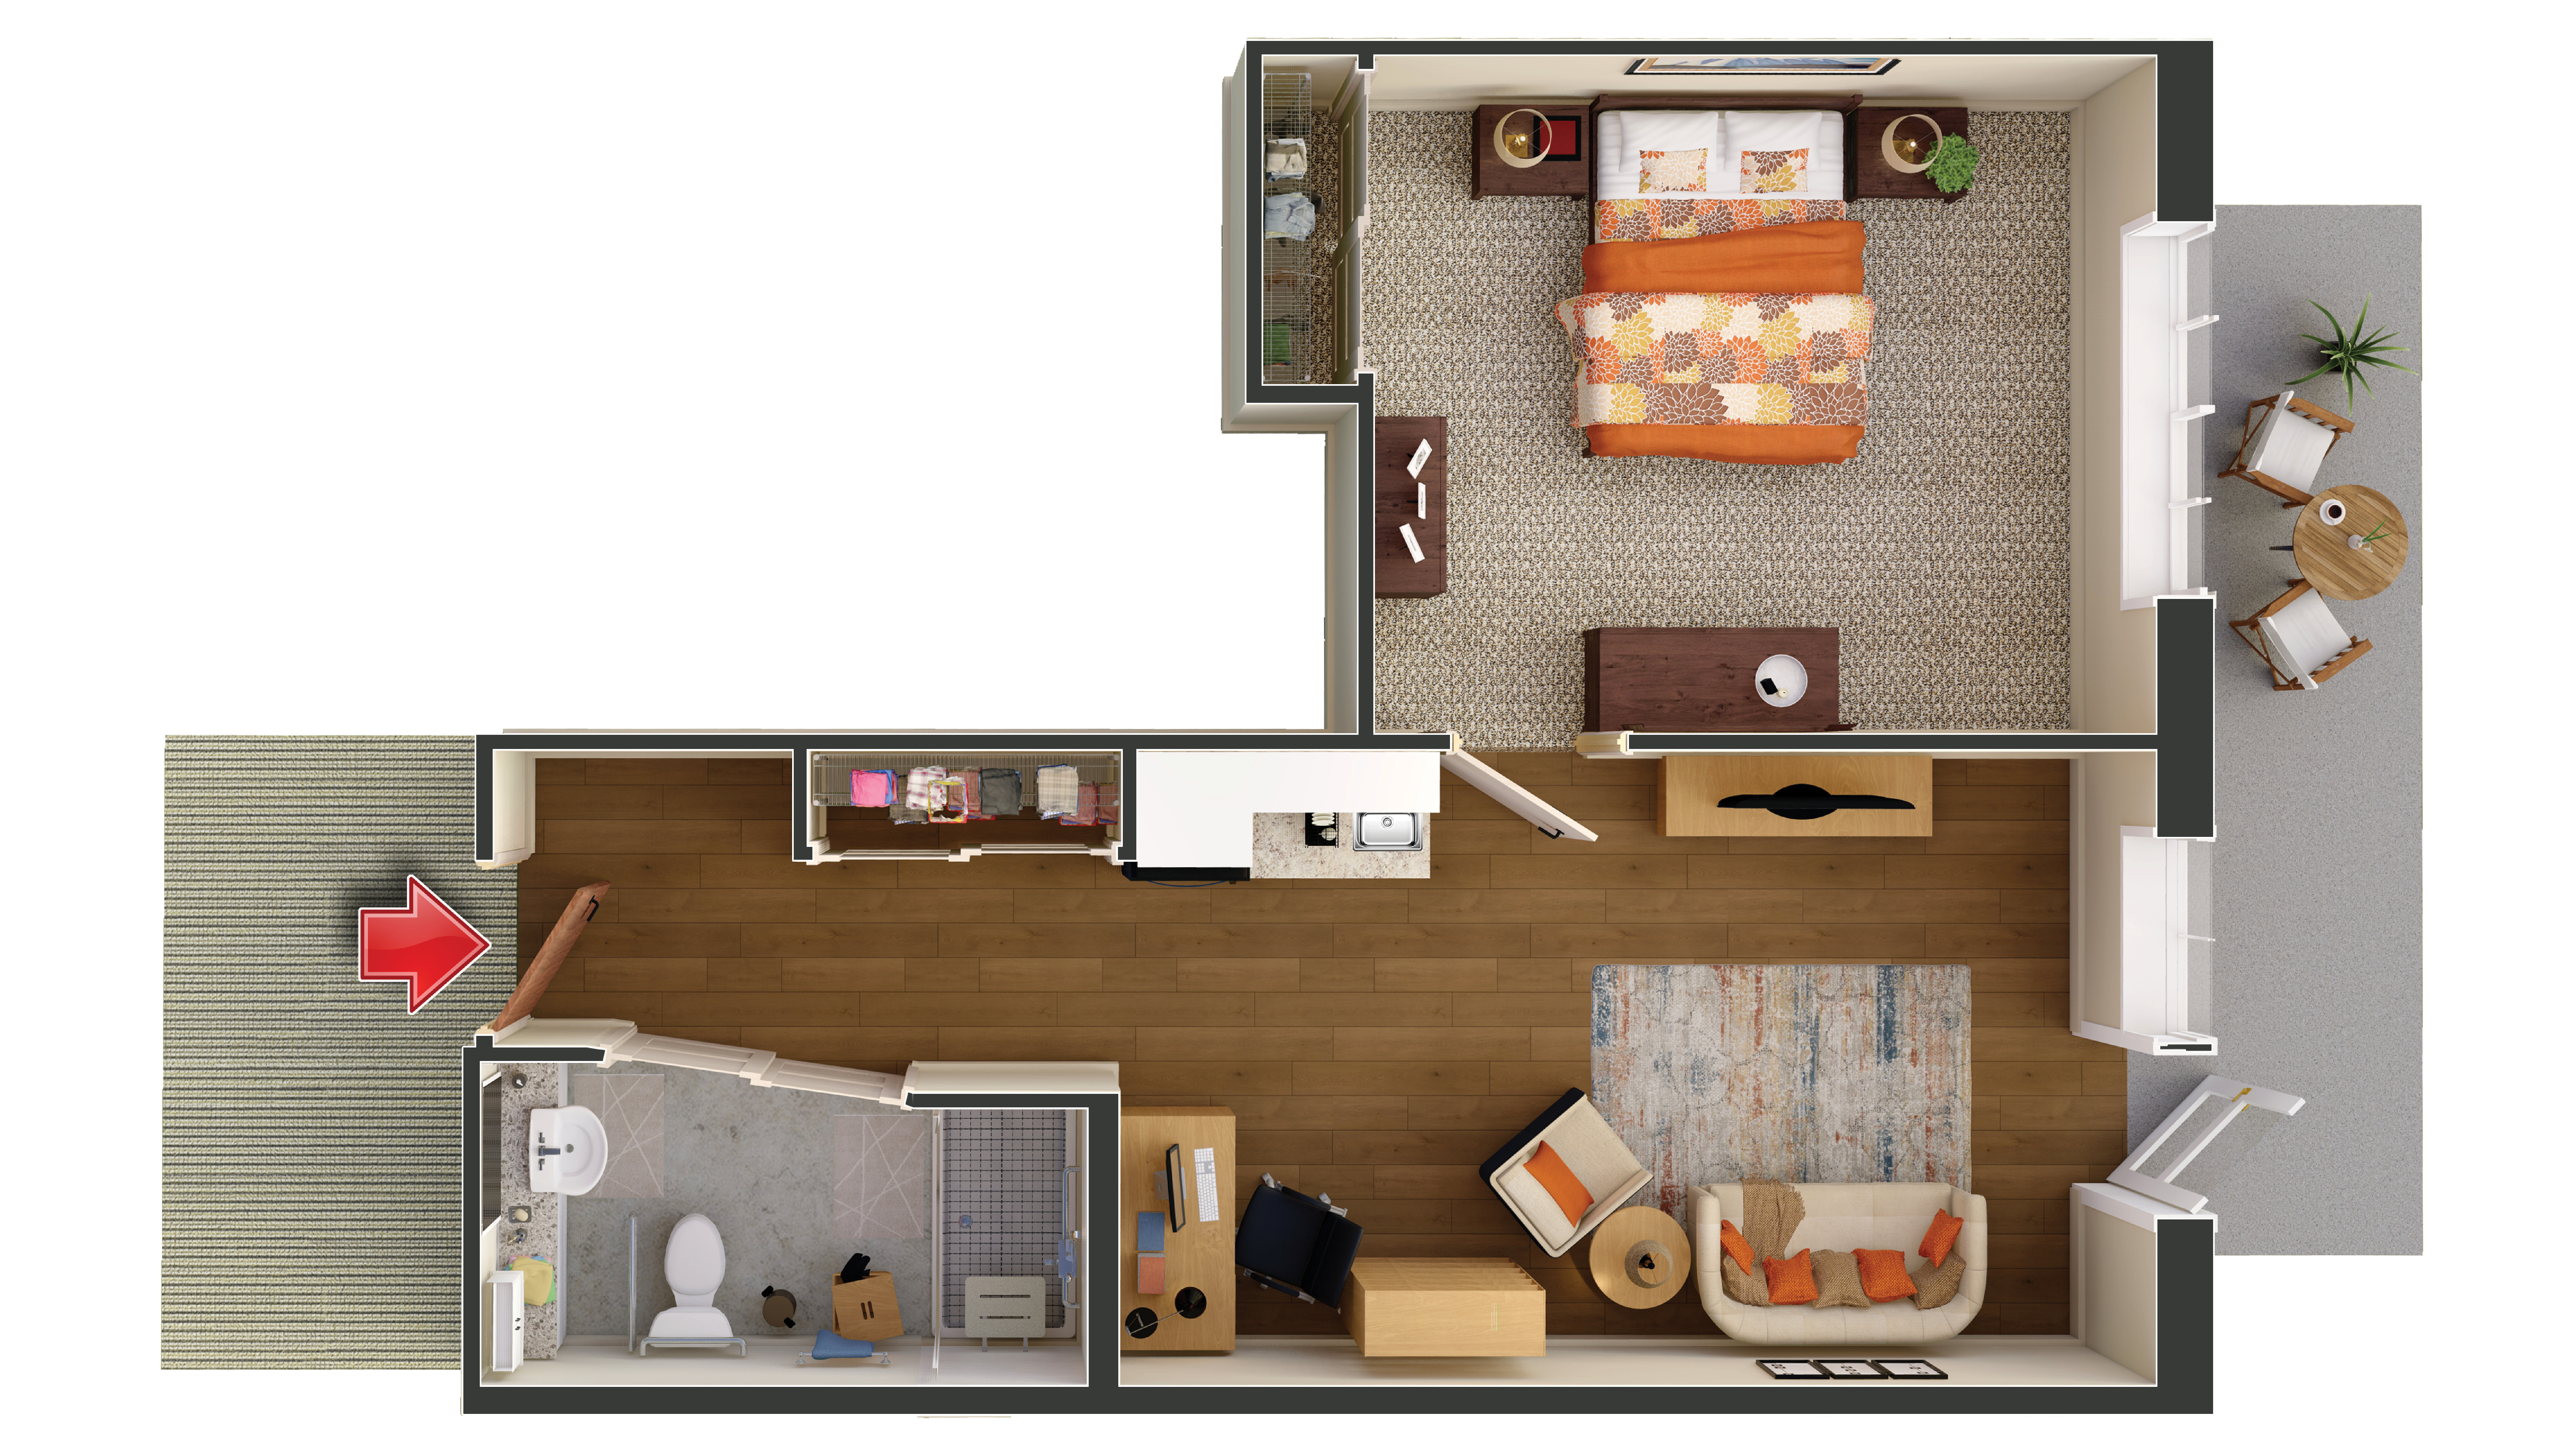 Williamsburg one-bedroom apartment layout